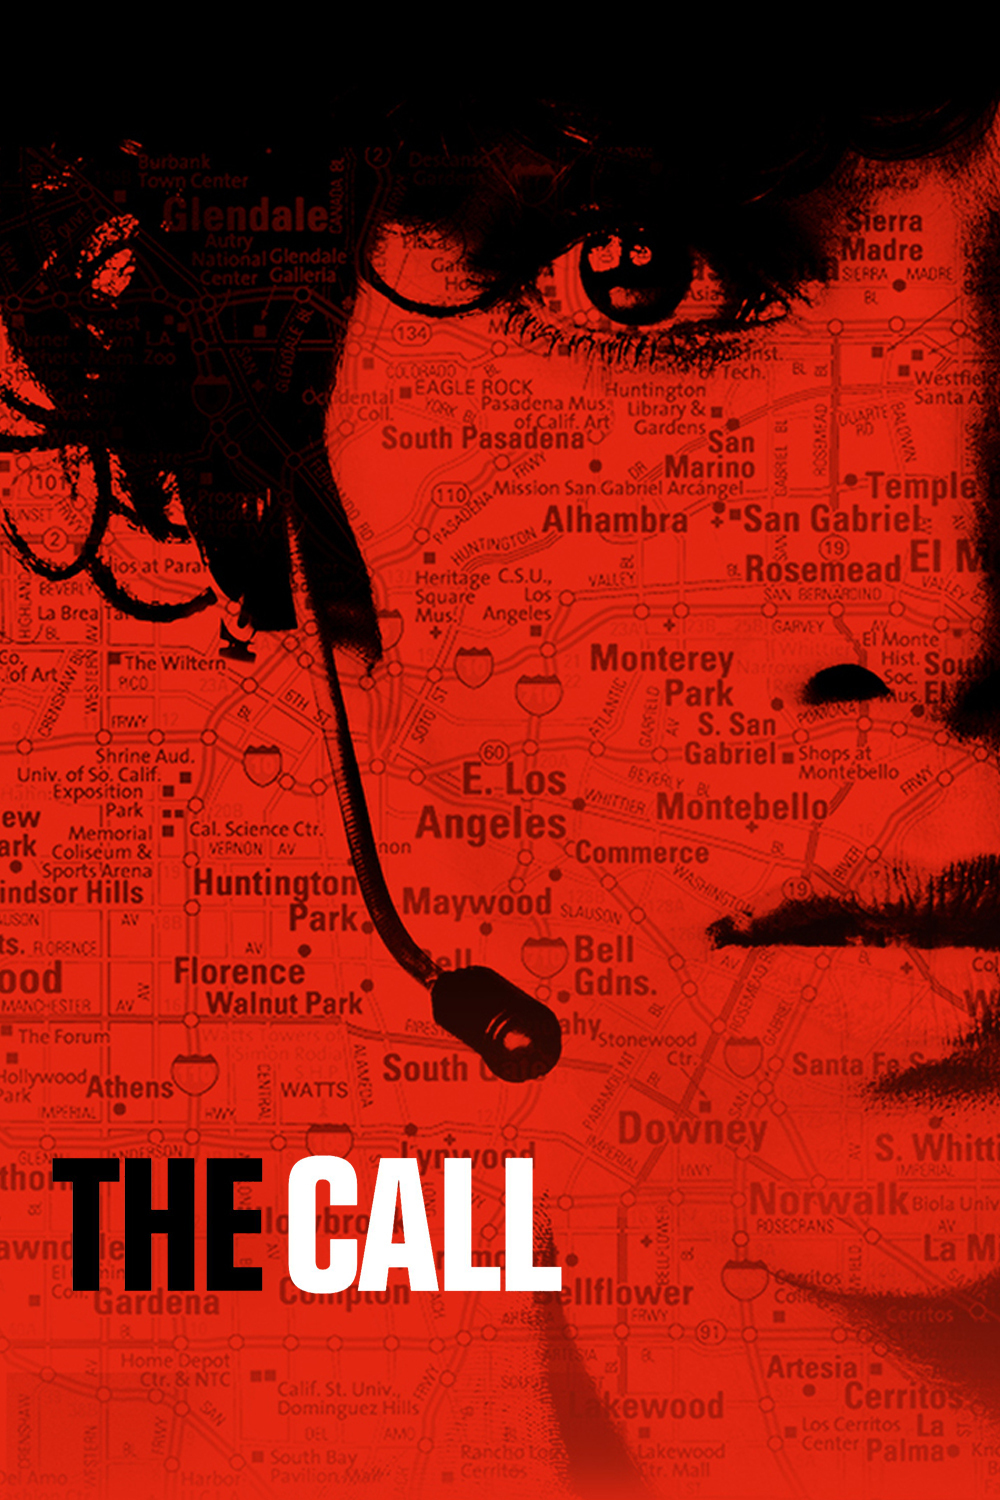 Poster for the movie "The Call"